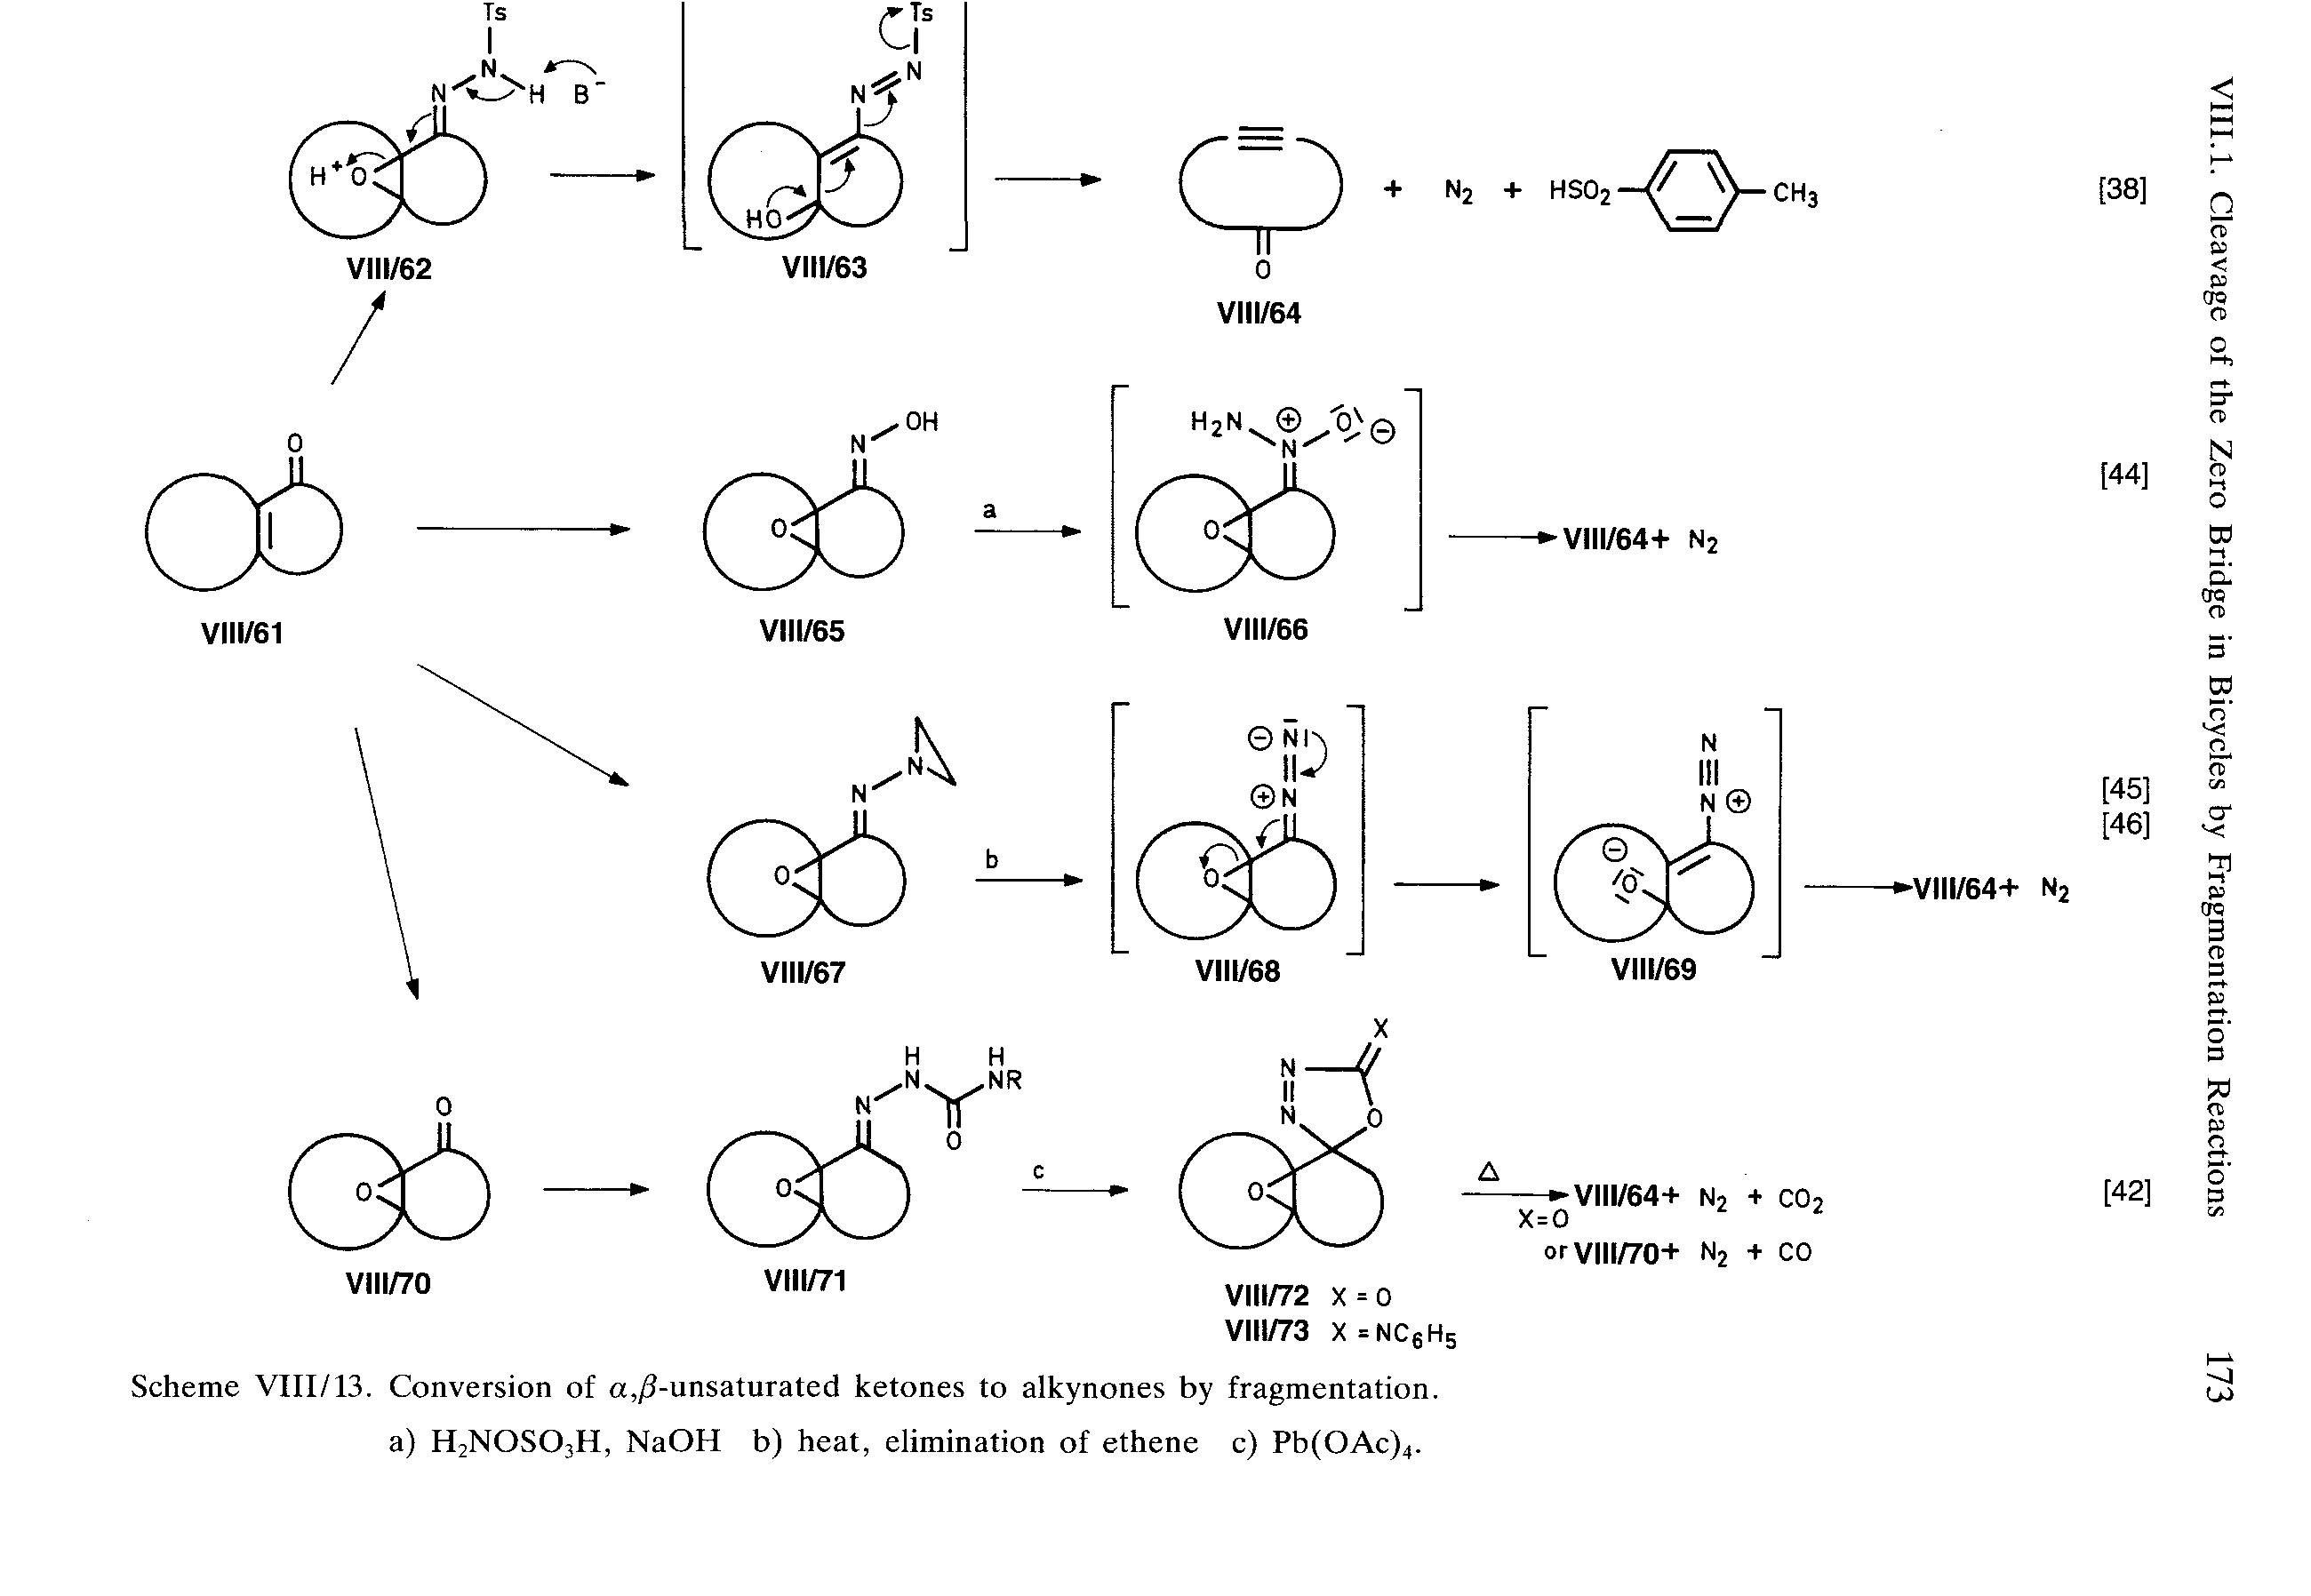 Scheme VIII/13. Conversion of a,/ -unsaturated ketones to alkynones by fragmentation.